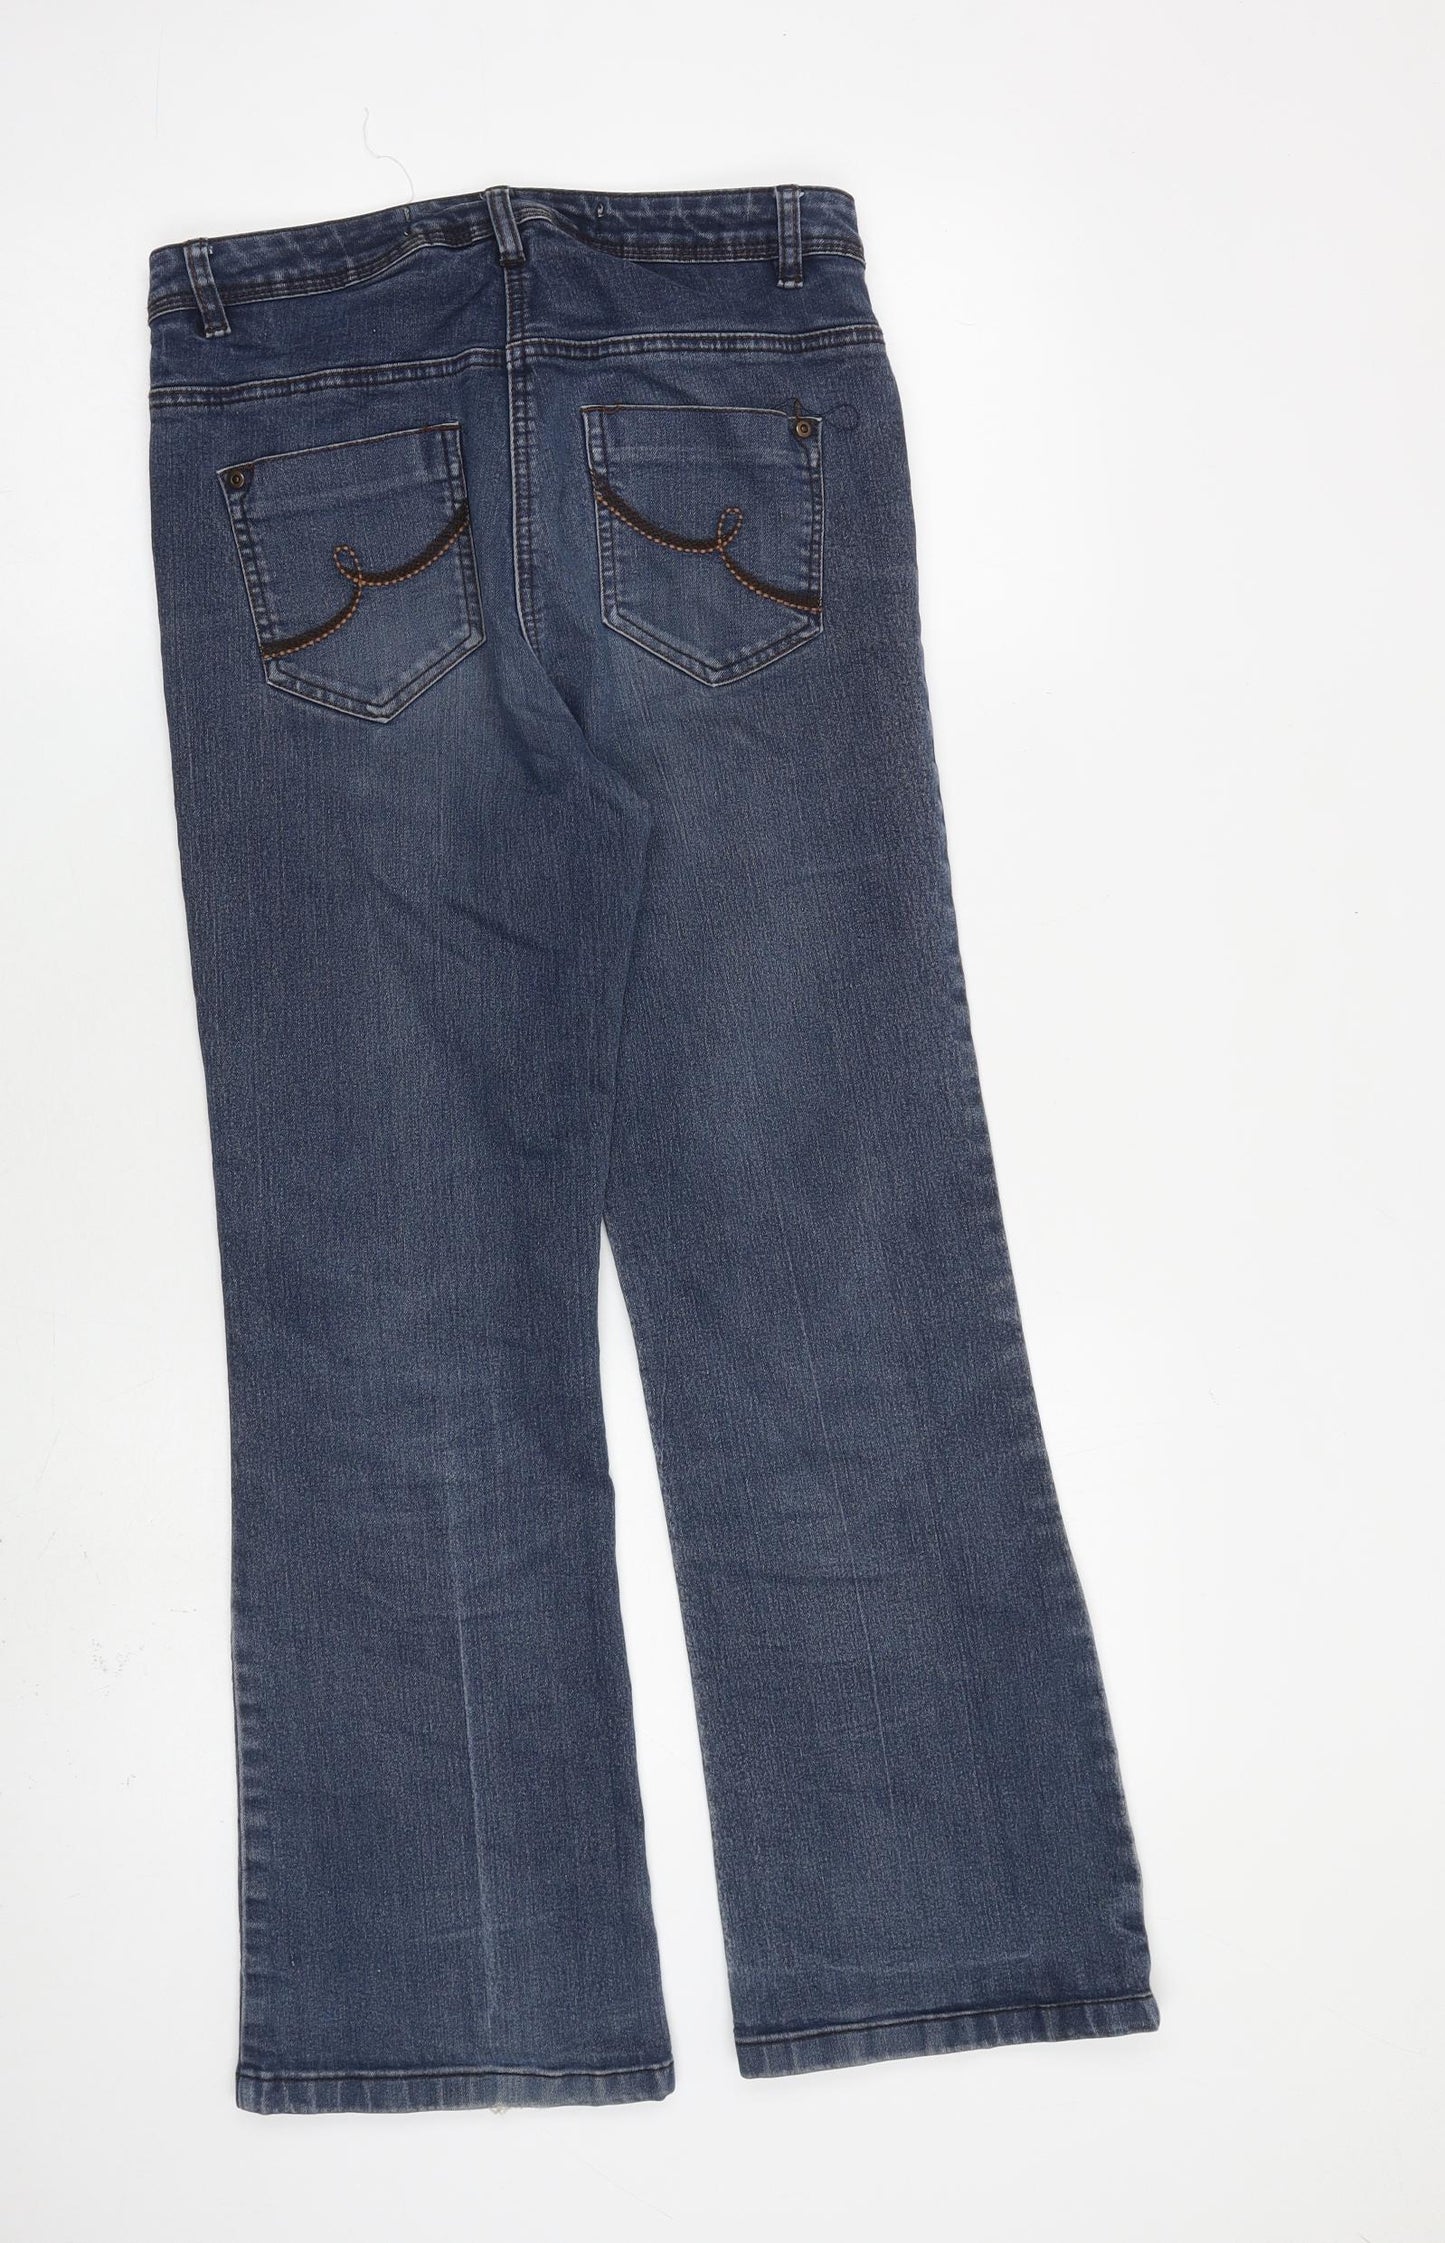 NEXT Womens Blue Cotton Flared Jeans Size 12 L28 in Regular Zip